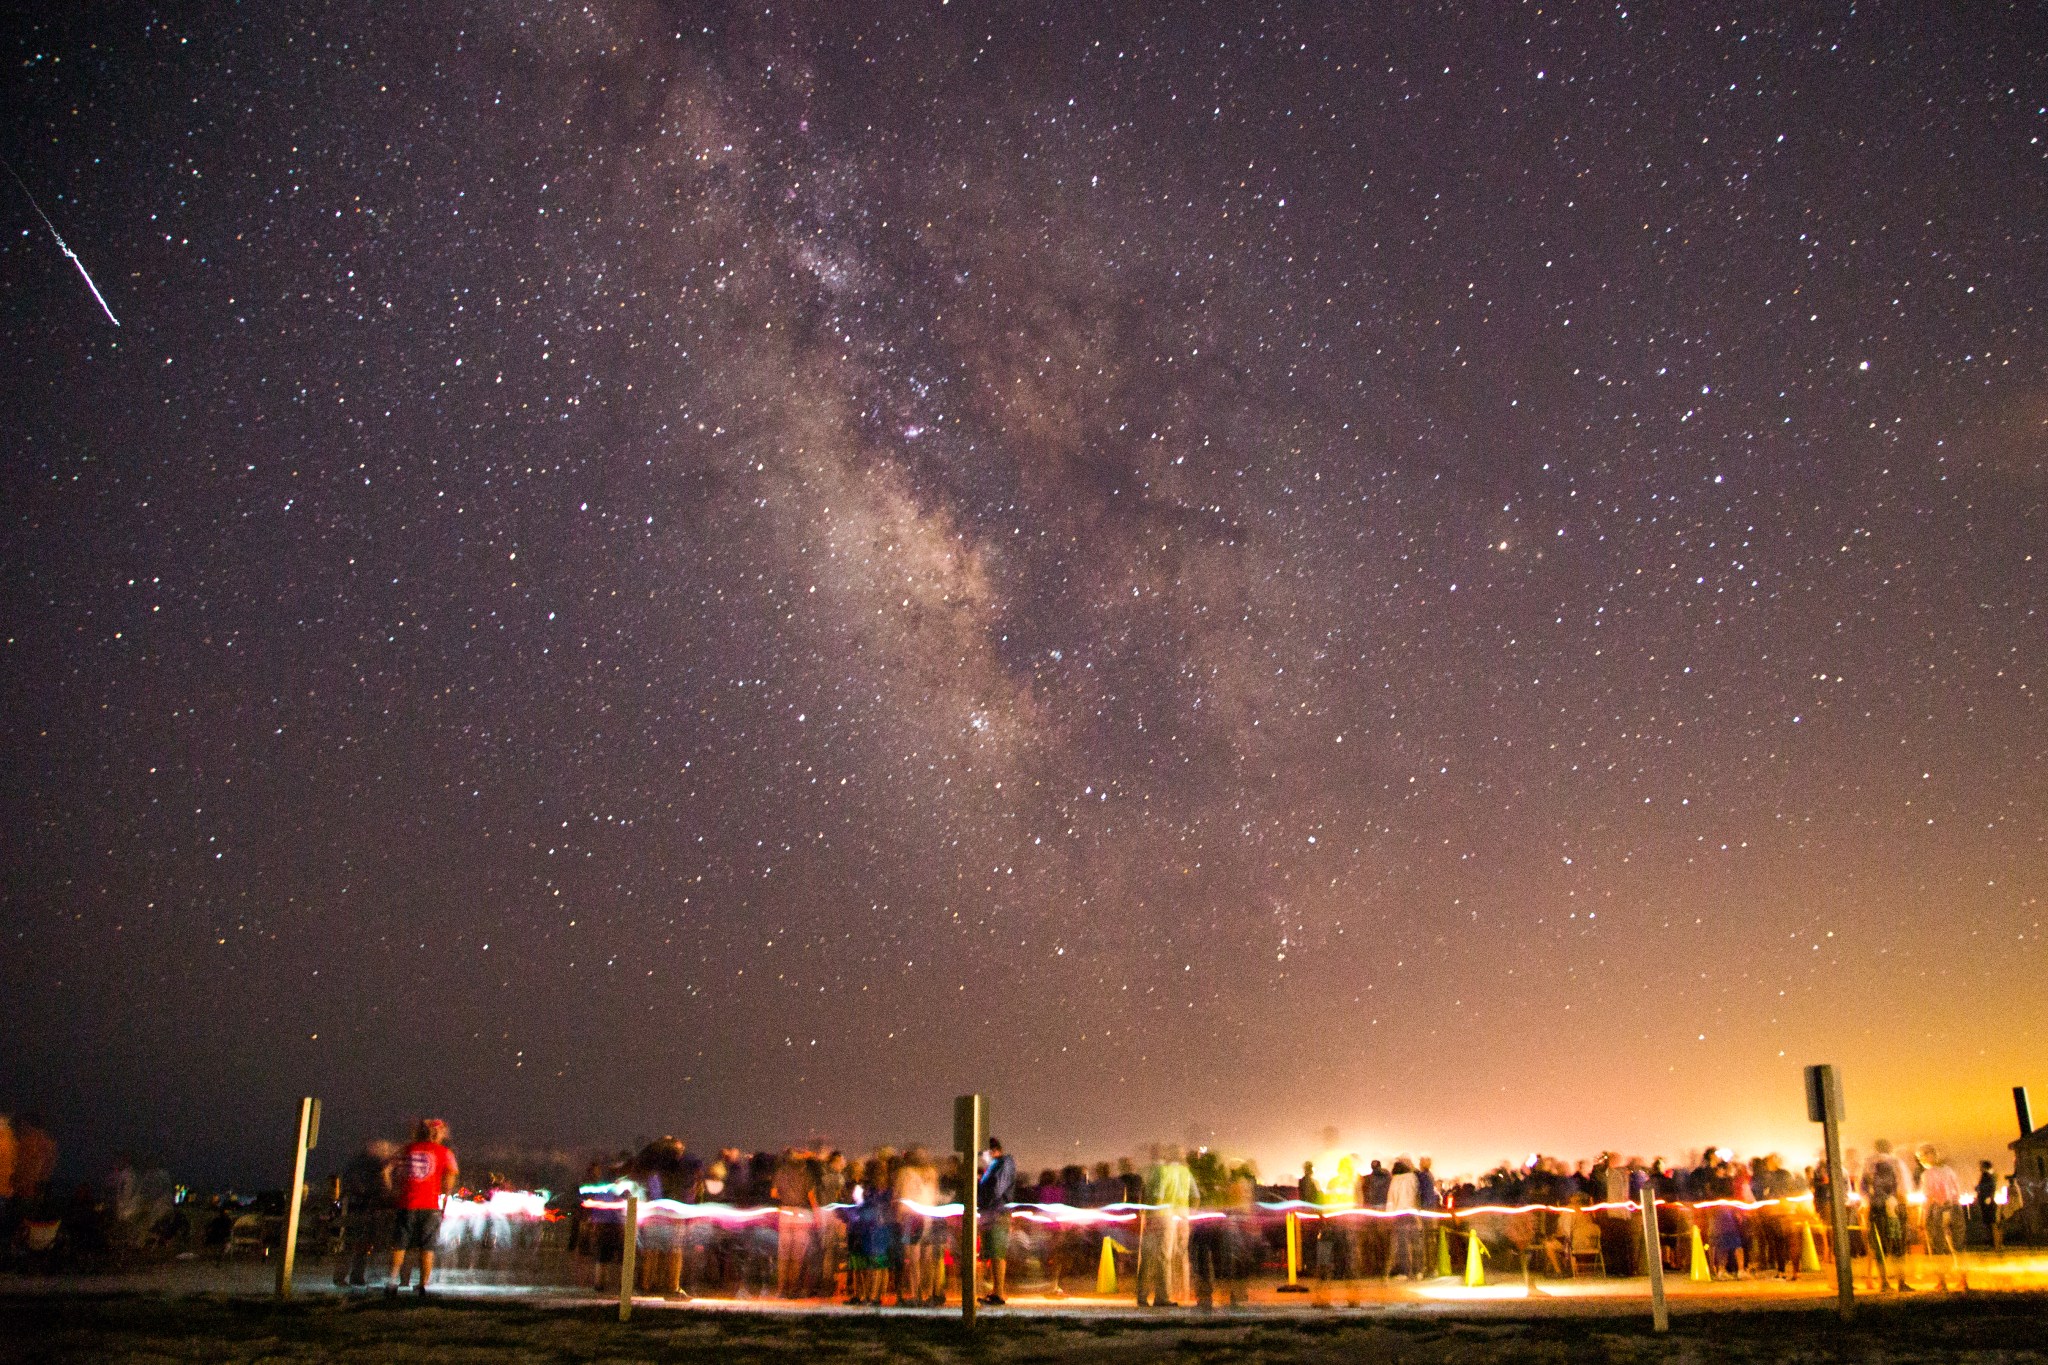 Hundreds of people stand in lines on the beach waiting their turn to look through telescopes at an astronomy event, above them the cloudy streaks of the milky way are surrounded by thousands of bright stars.